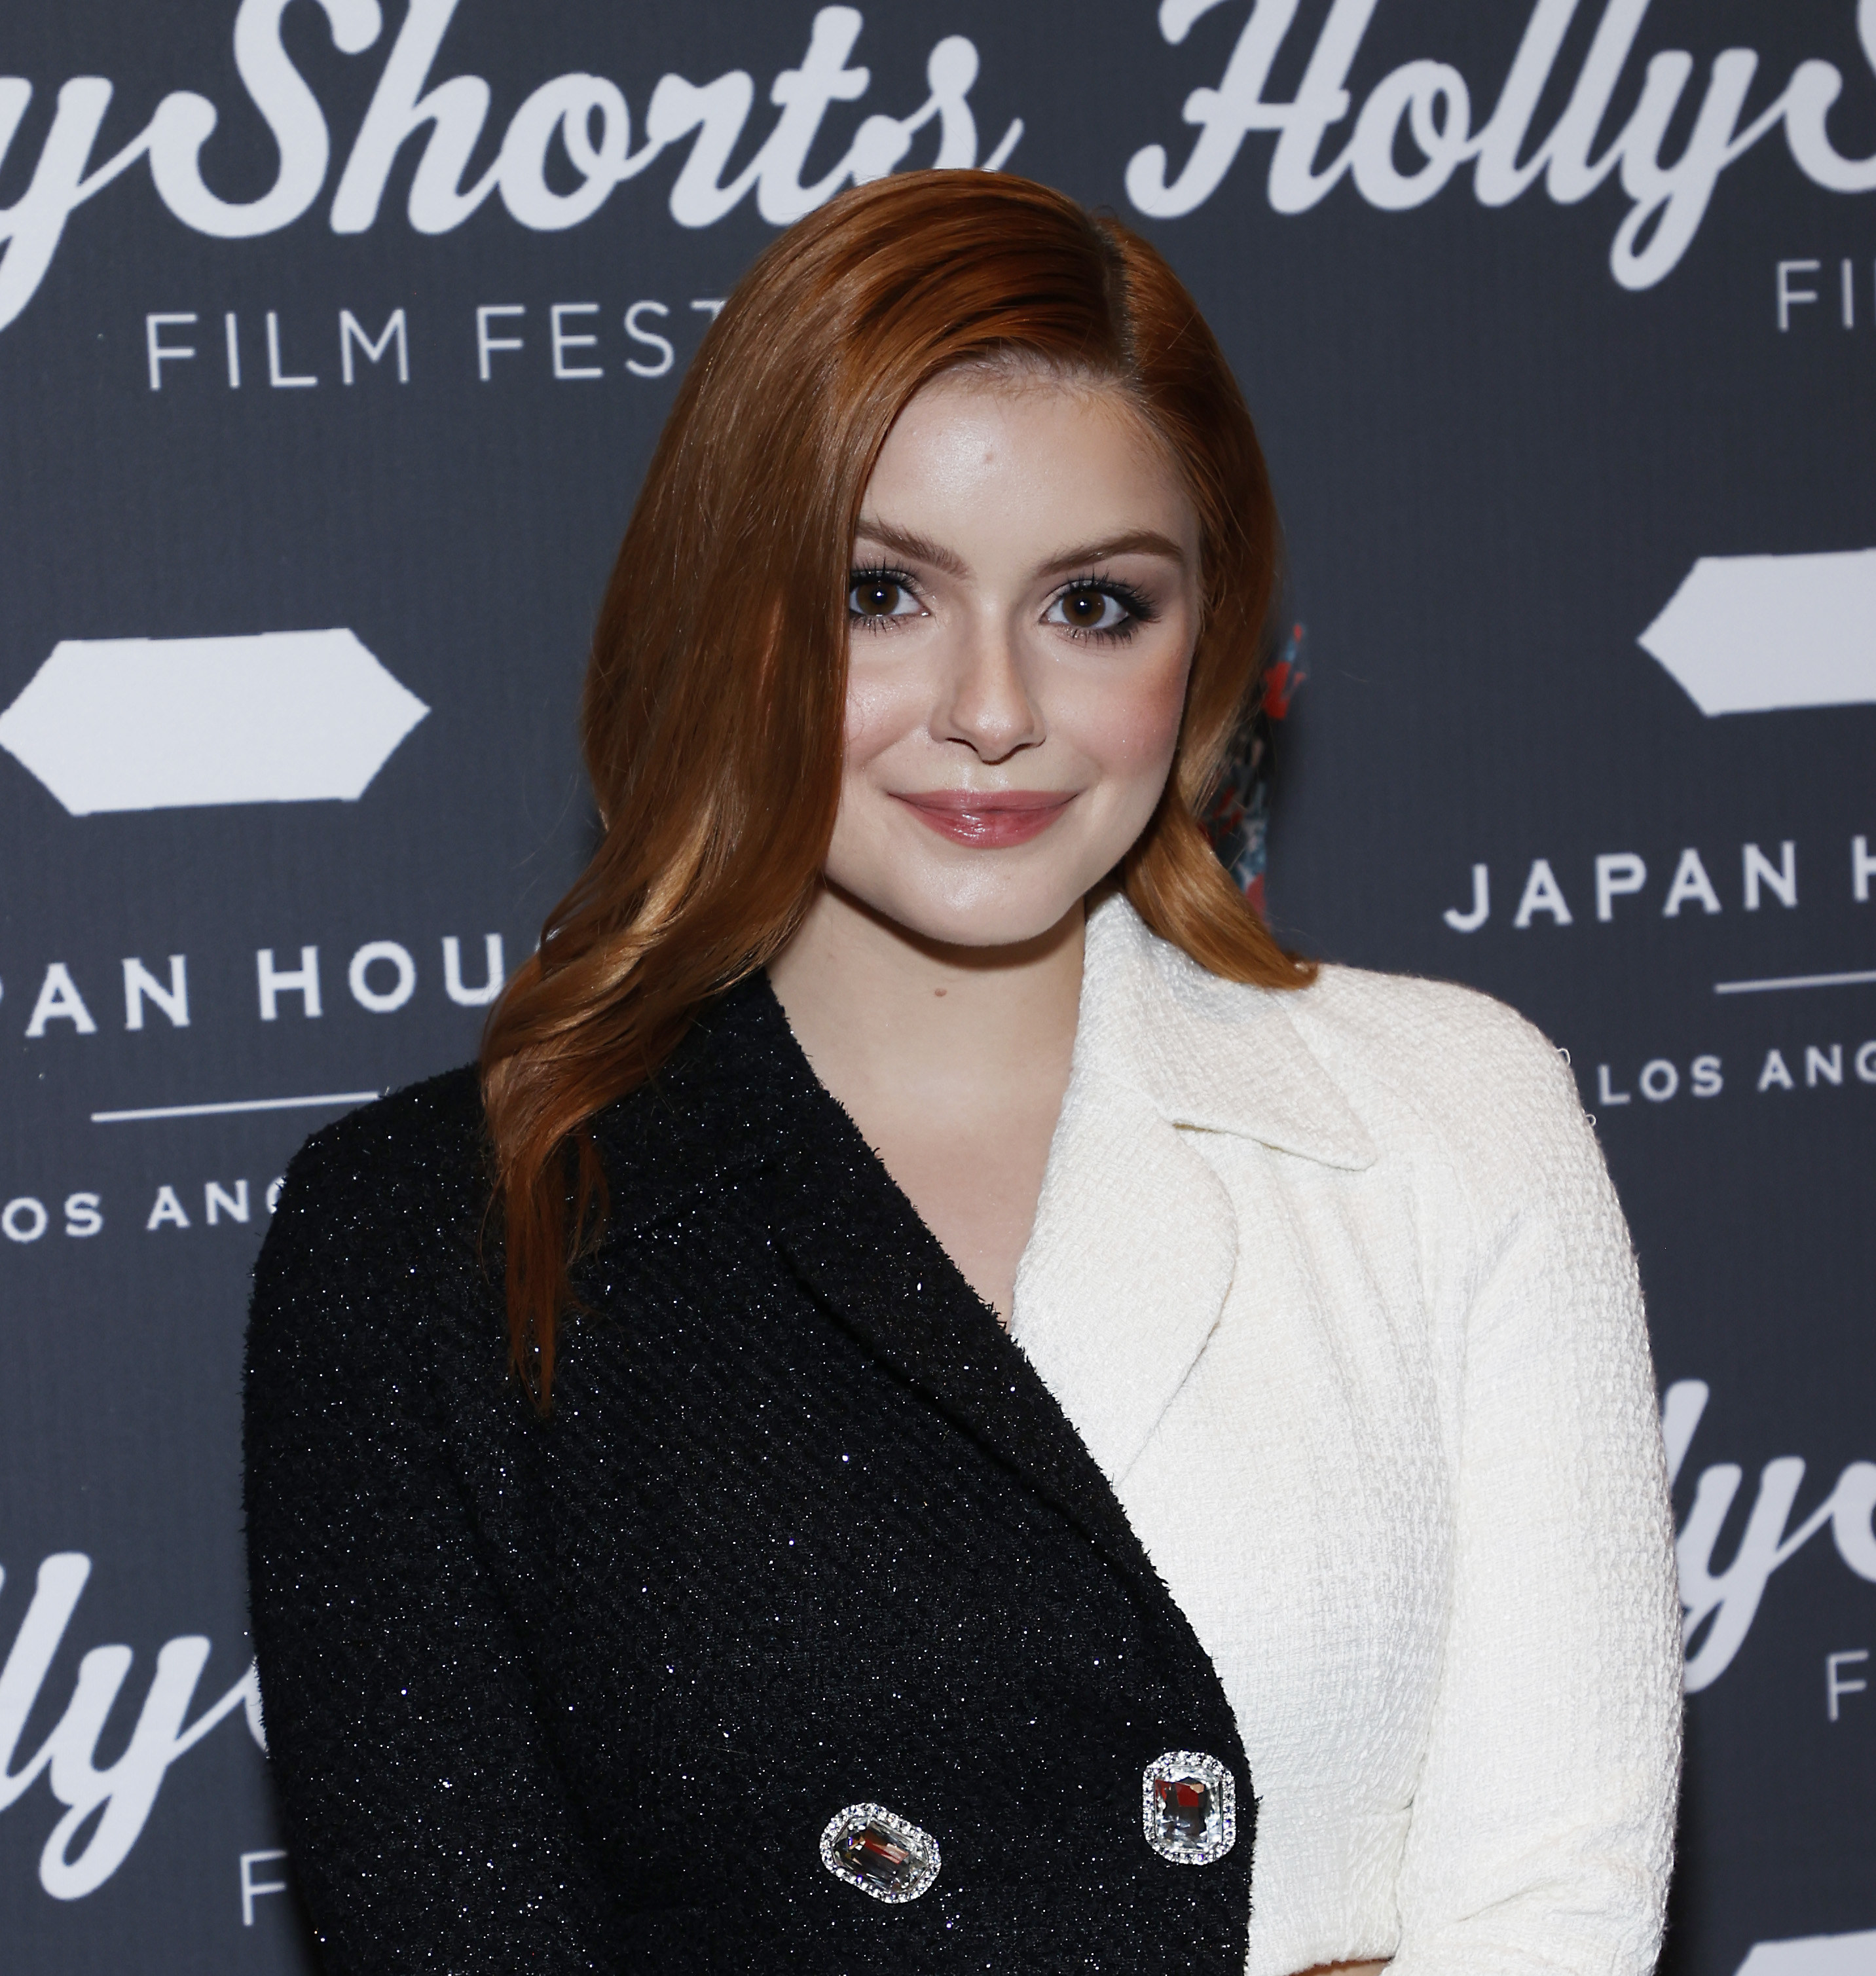 Ariel smiling at the camera, wearing a blazer jacket that&#x27;s black on one side and white on the other